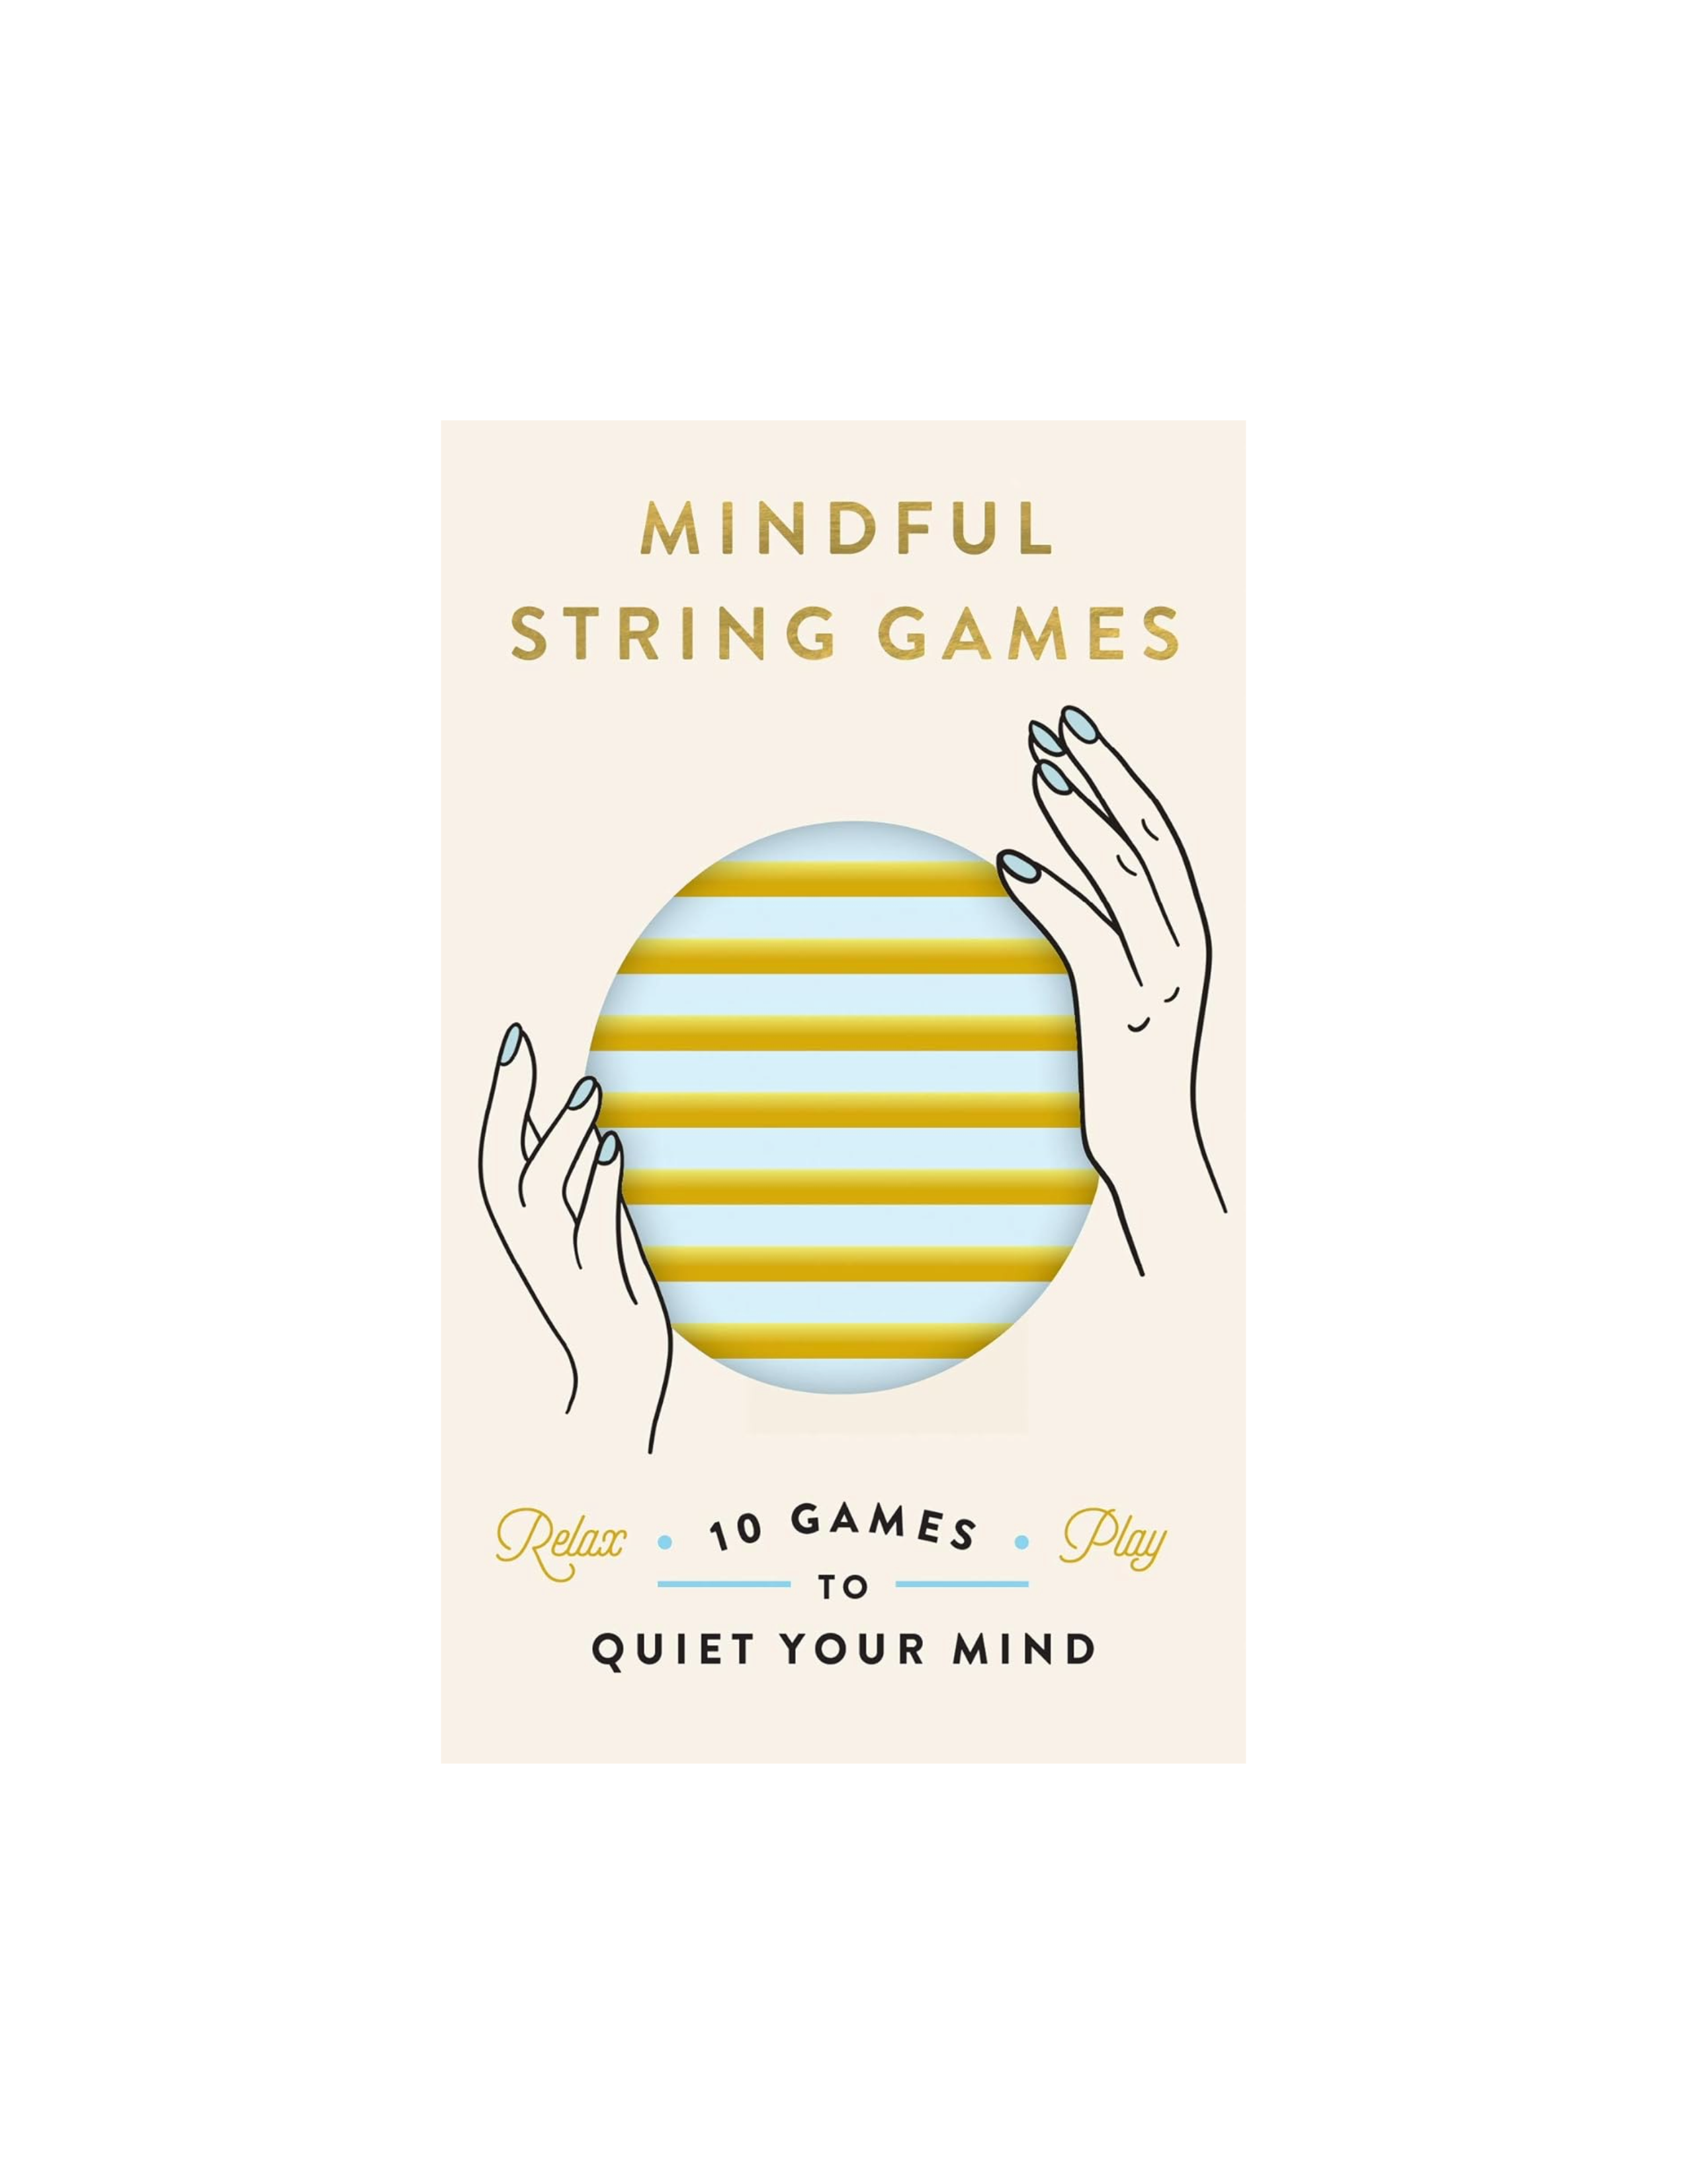 Mindful String Games: 15 Games to Quiet Your Mind